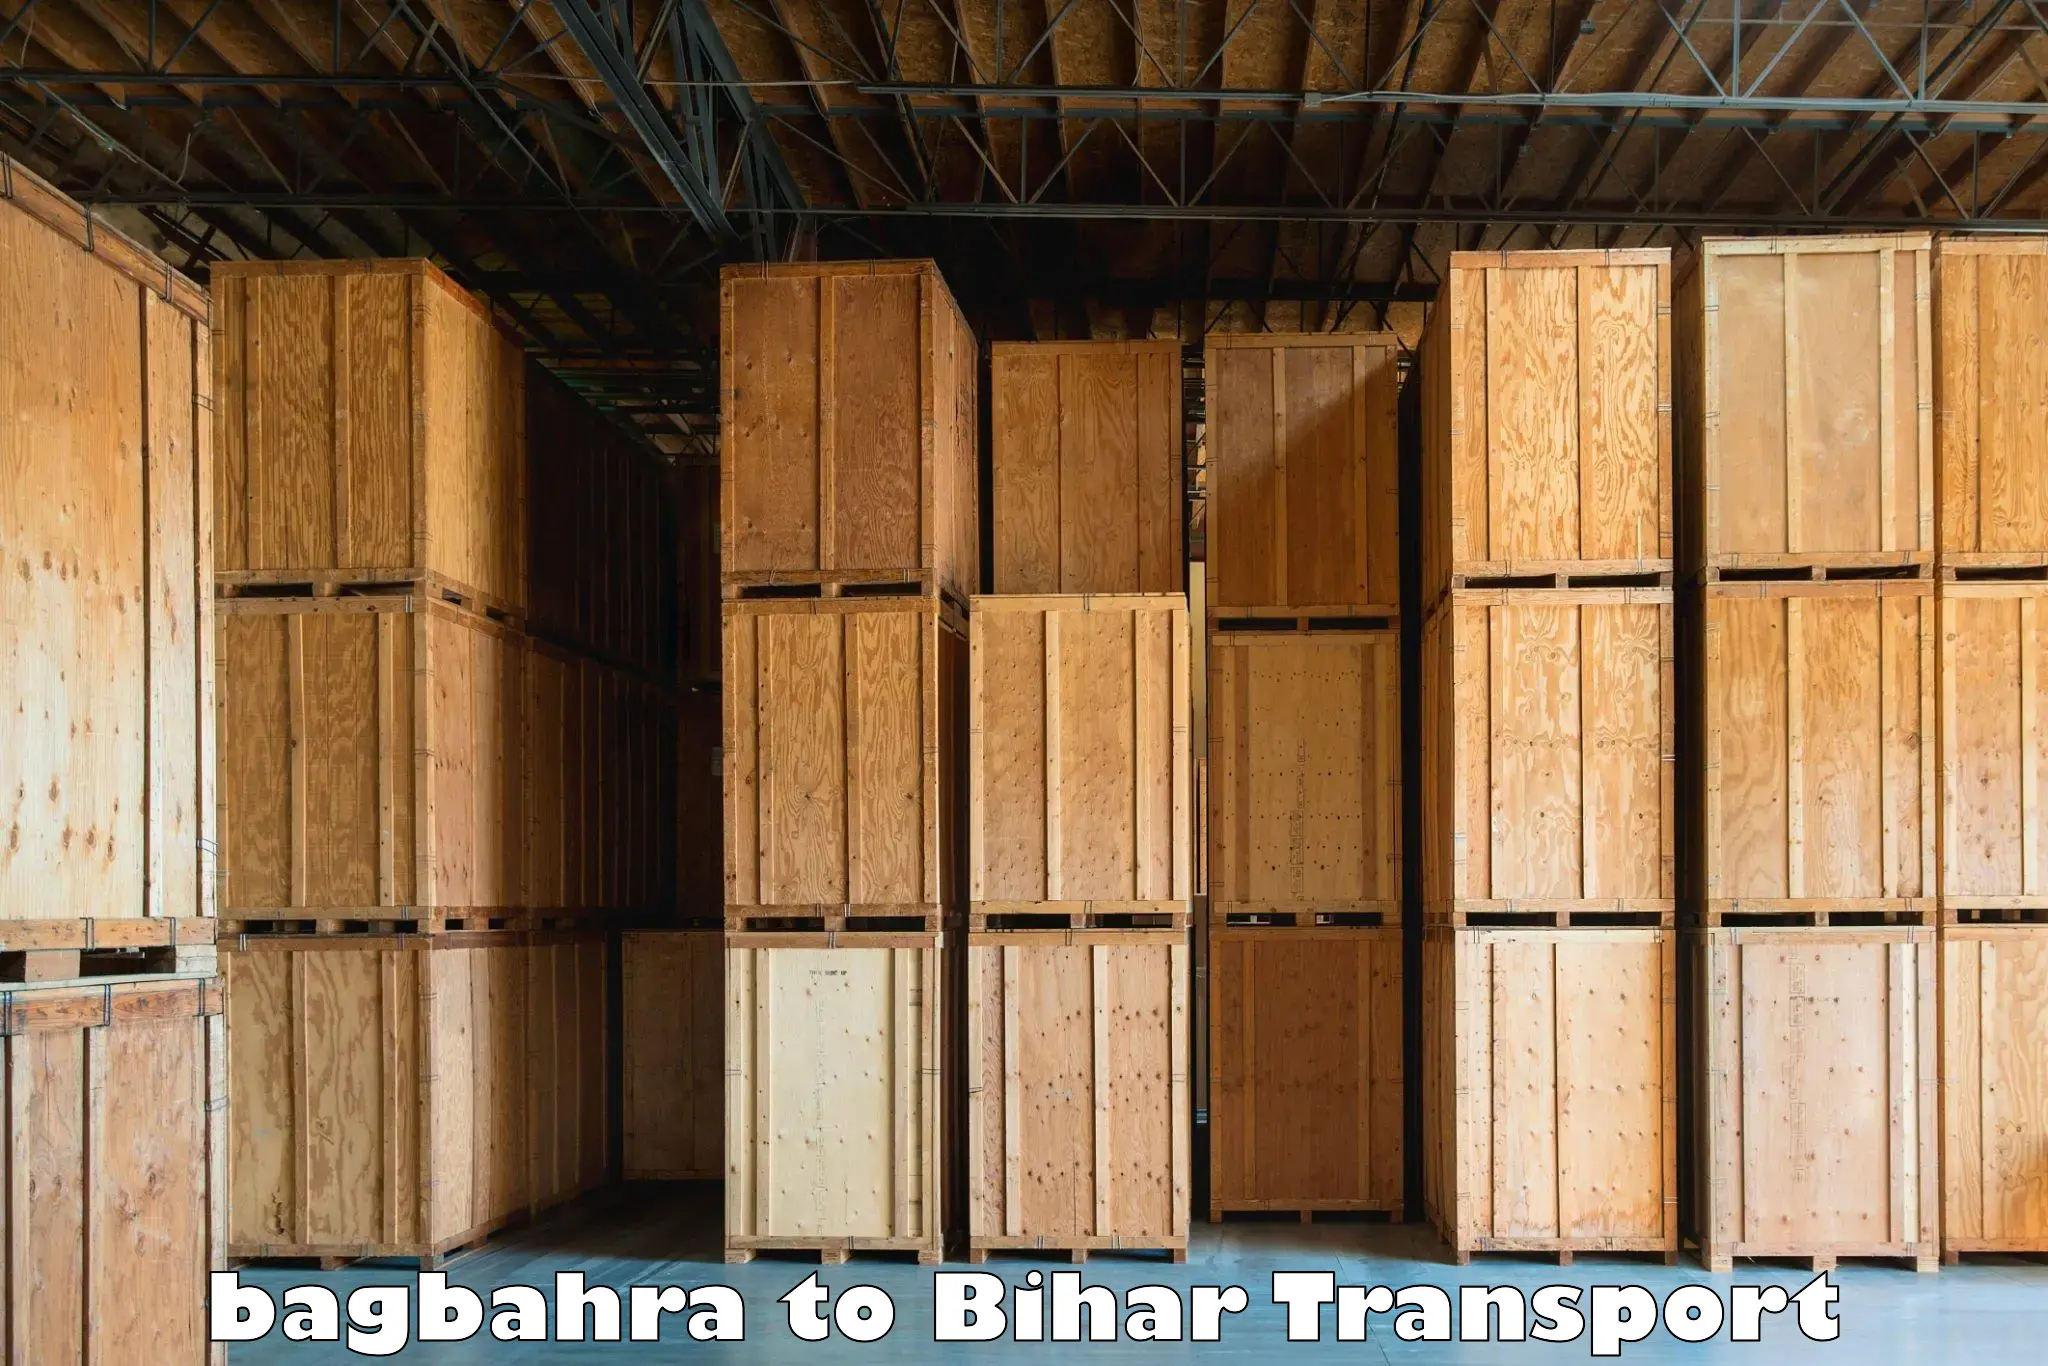 Land transport services bagbahra to Ghanshyampur